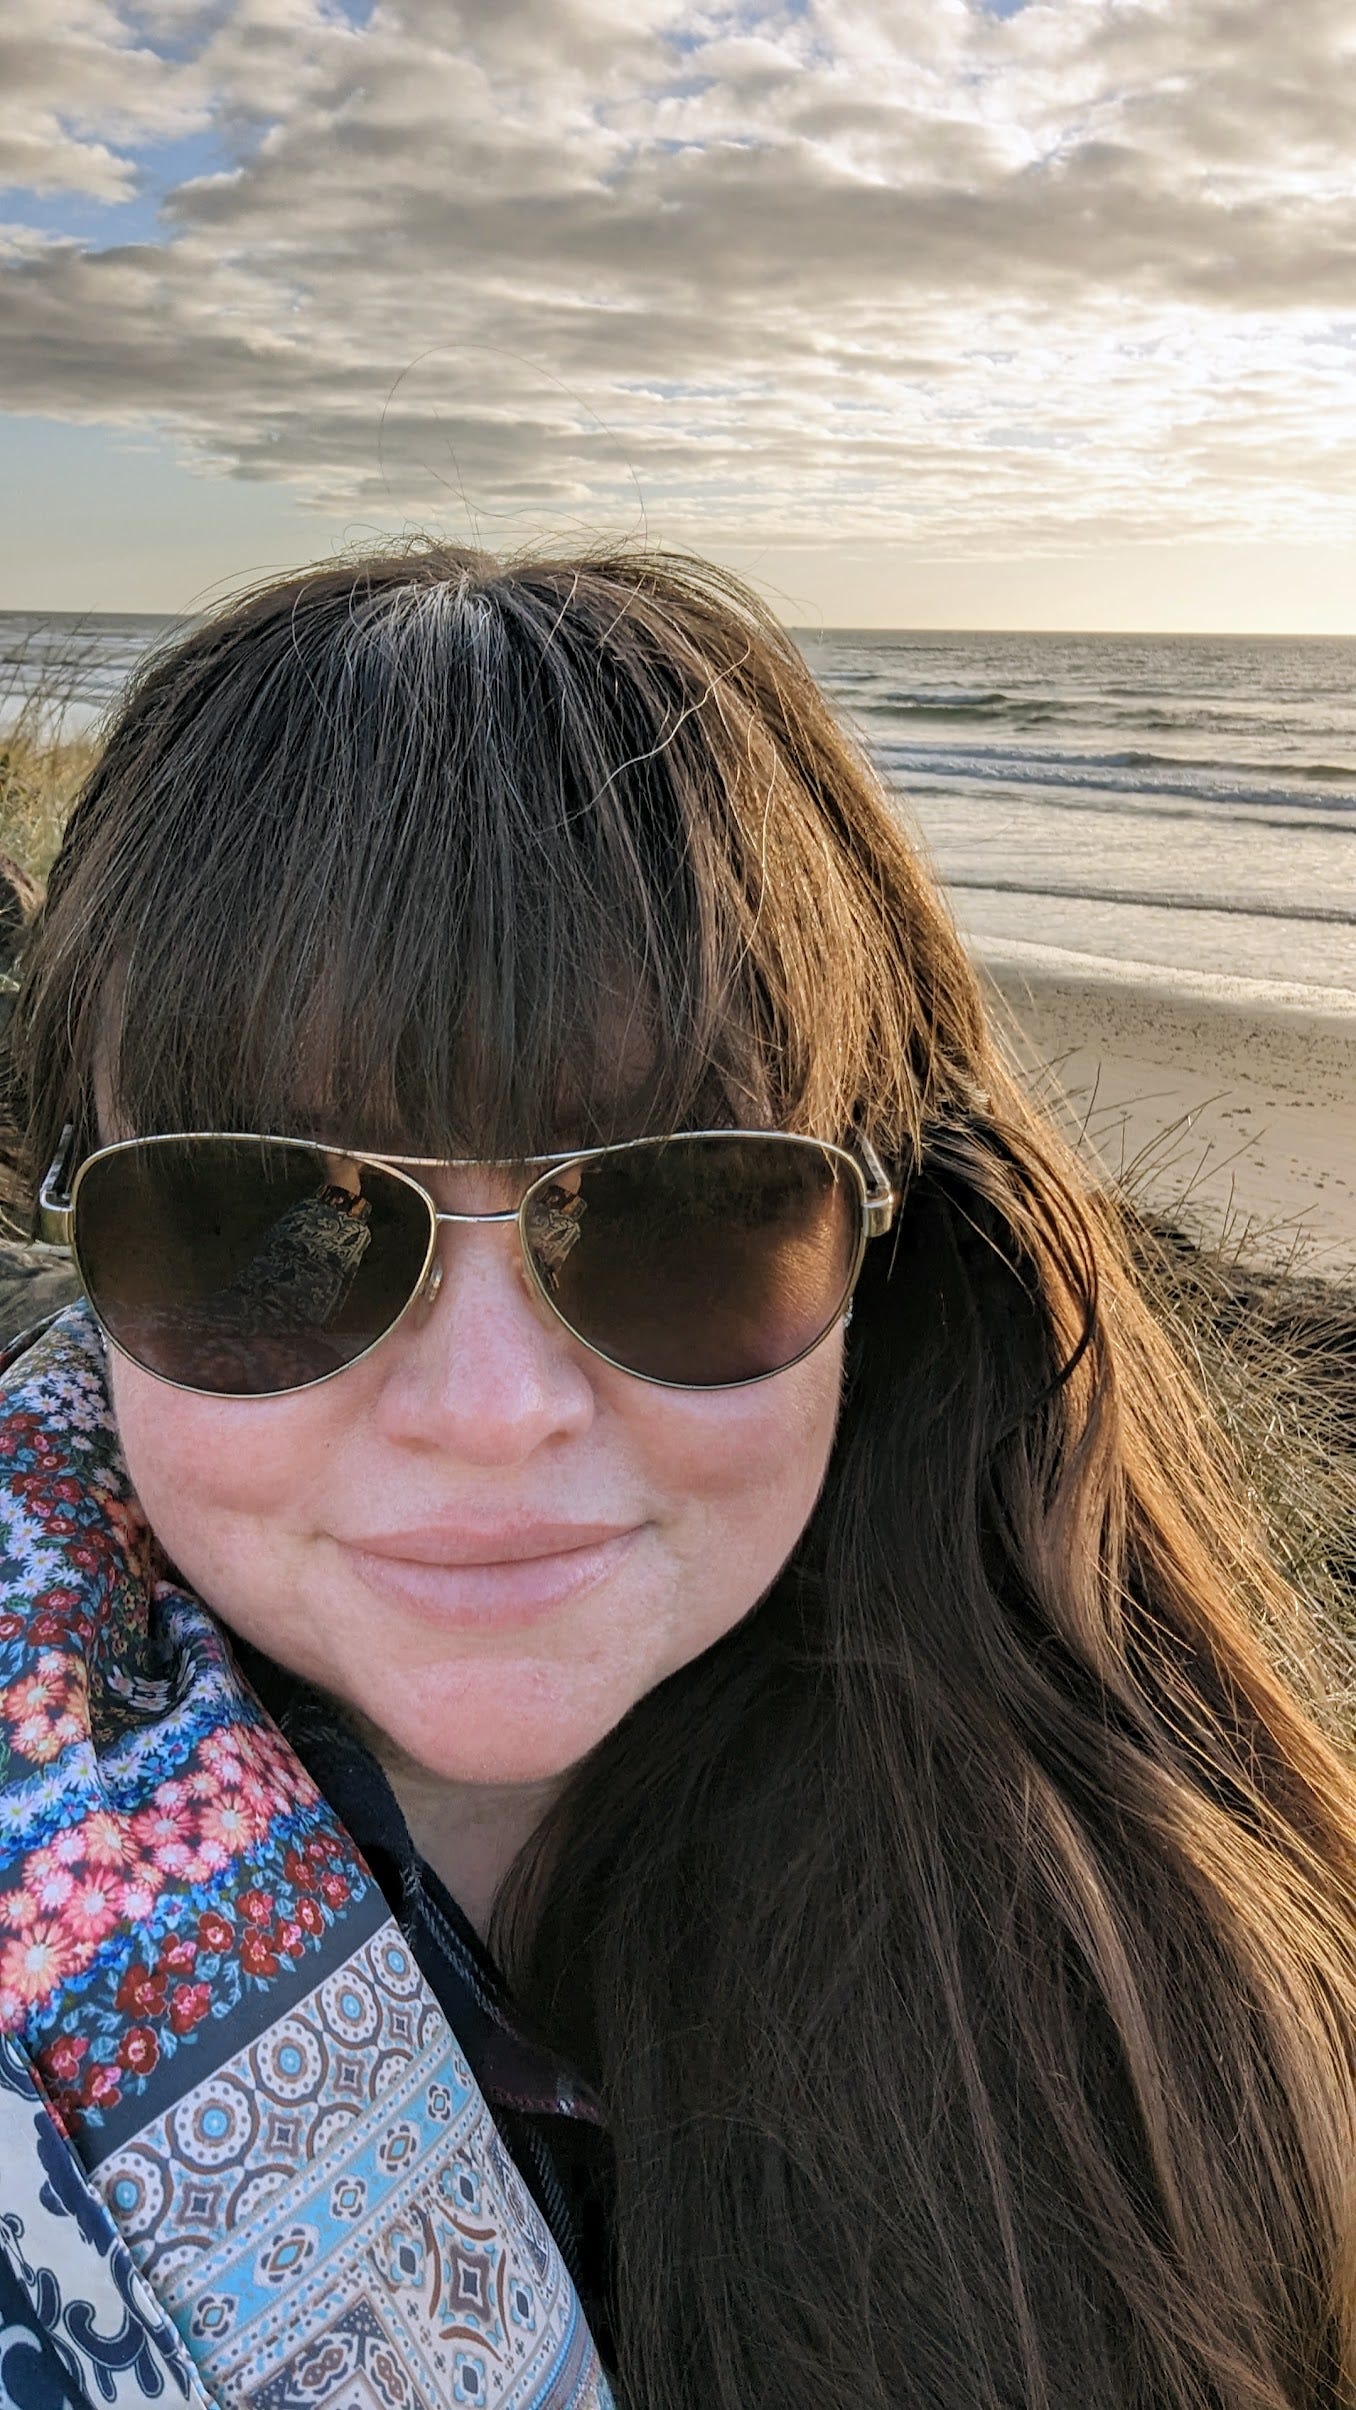 Photo of Sara, wearing sunglasses and a patterned coat, on the beach in Oregon at sunset